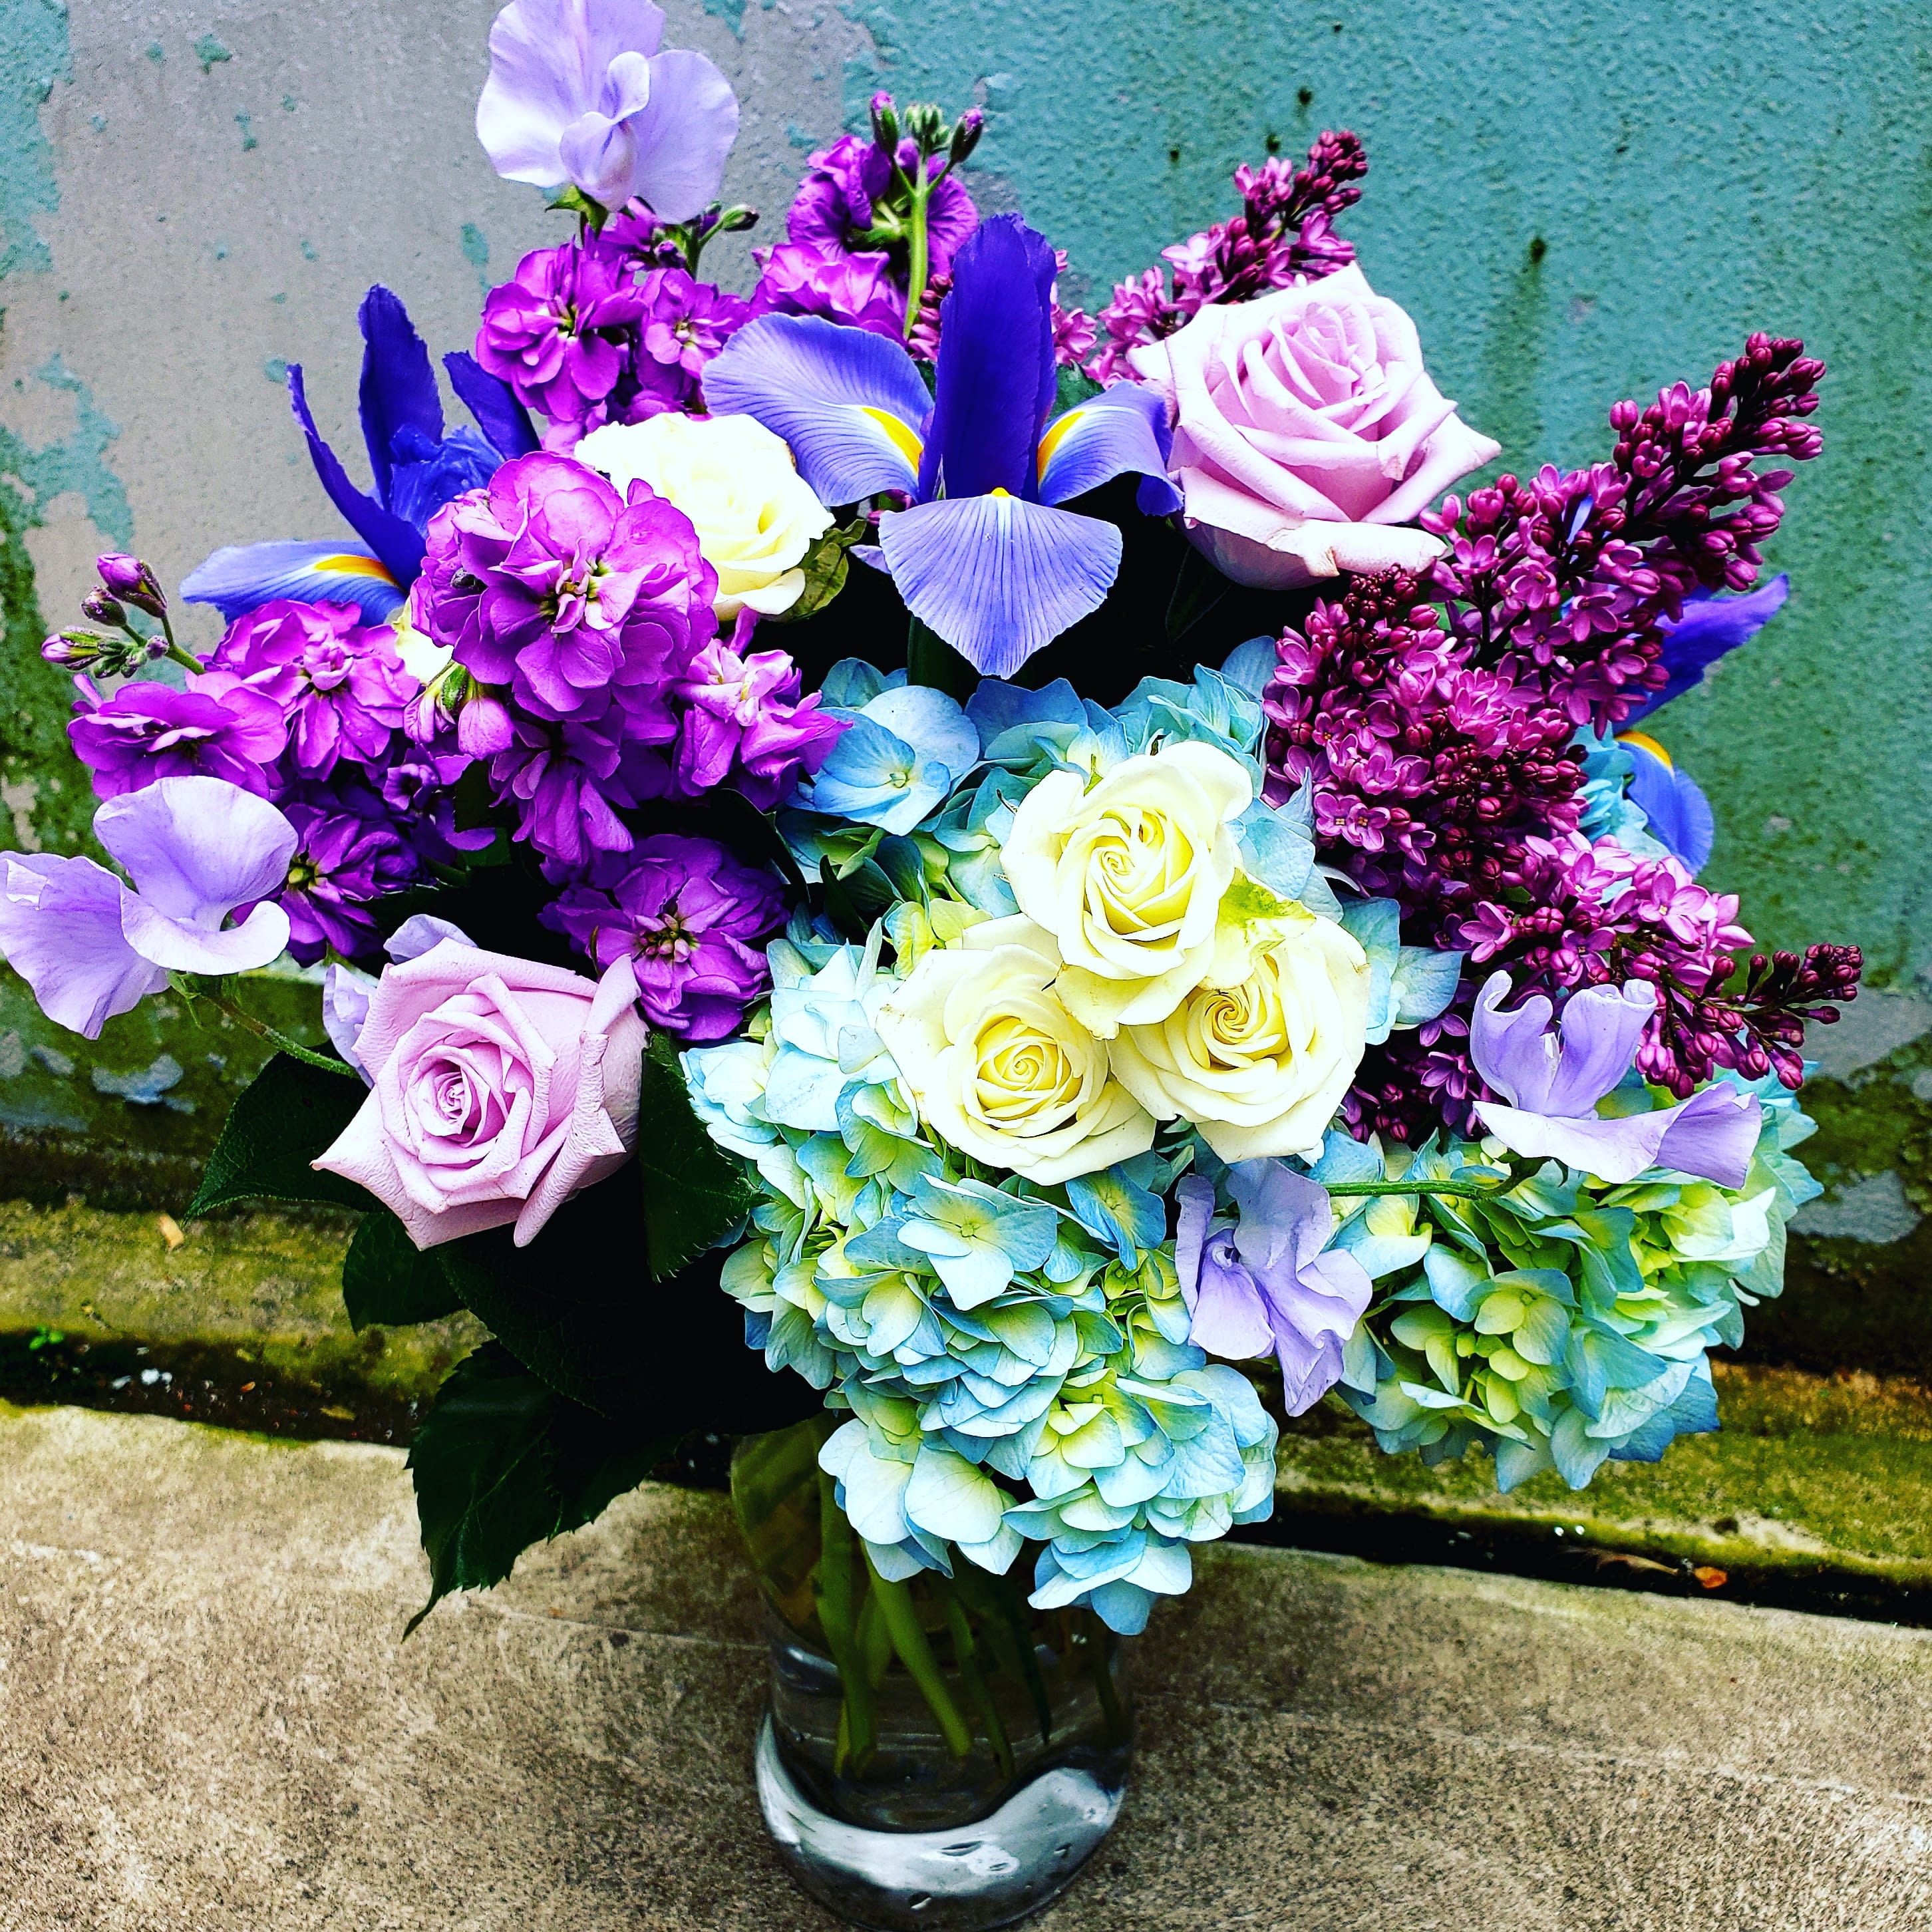 Sugar sweet - Shades of lavender periwinkle white and purple with locally grown fresh blooms on a classic vase